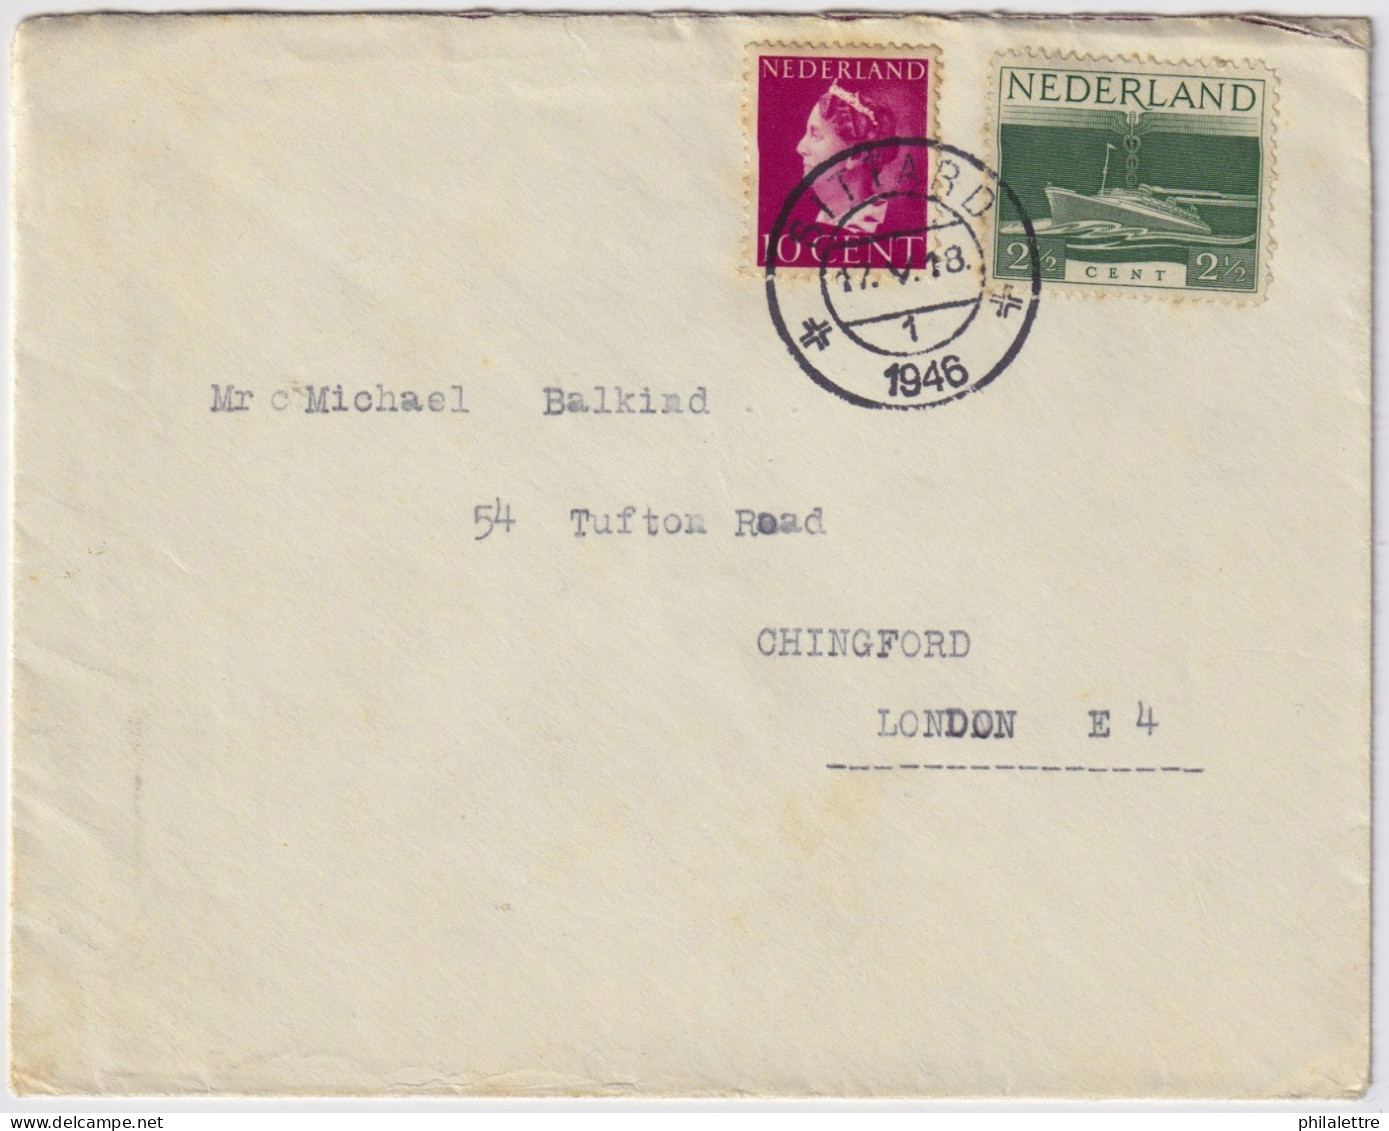 PAYS-BAS / THE NETHERLANDS - 1946 Mi.343 & Mi.429 On Cover From SITTARD To LONDON, England - Briefe U. Dokumente